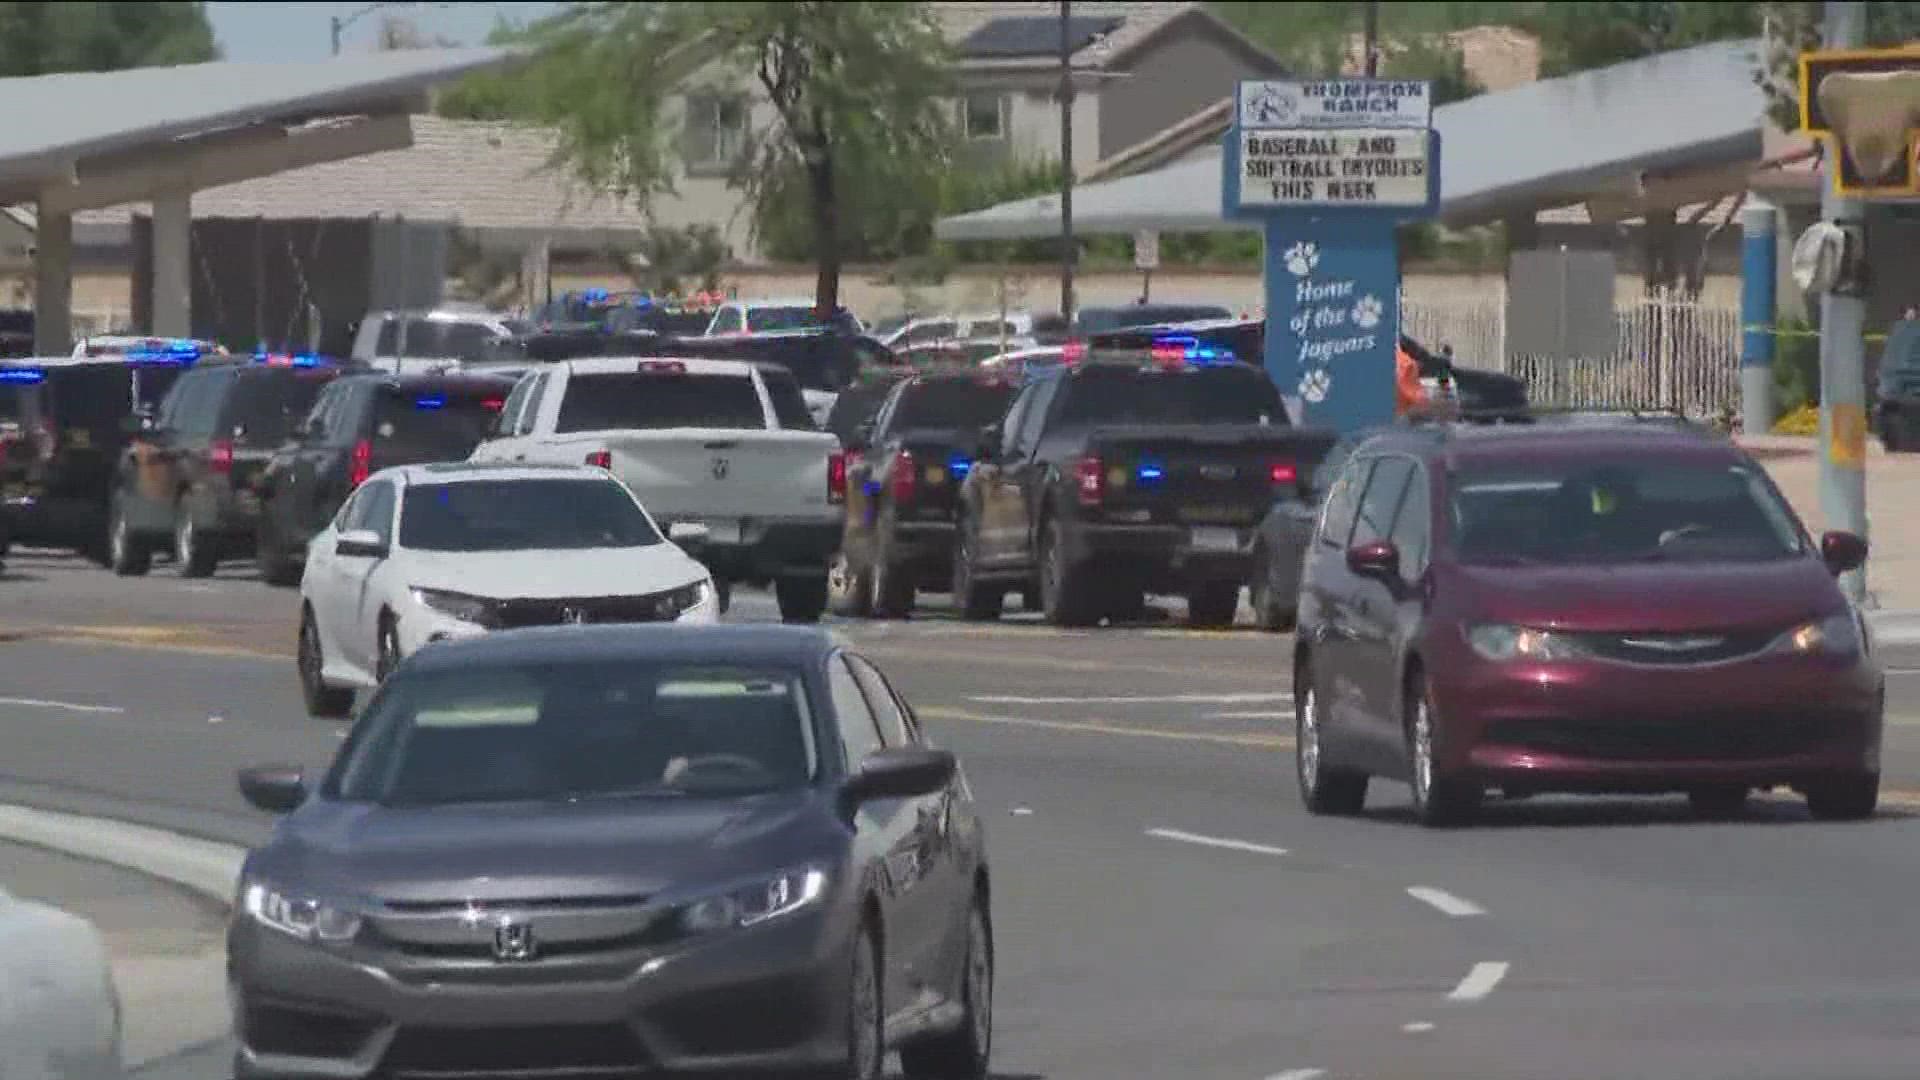 Students are returning to Thompson Ranch Elementary School in the northwest Valley after Friday's lockdown situation. Jen Wahl has the details.